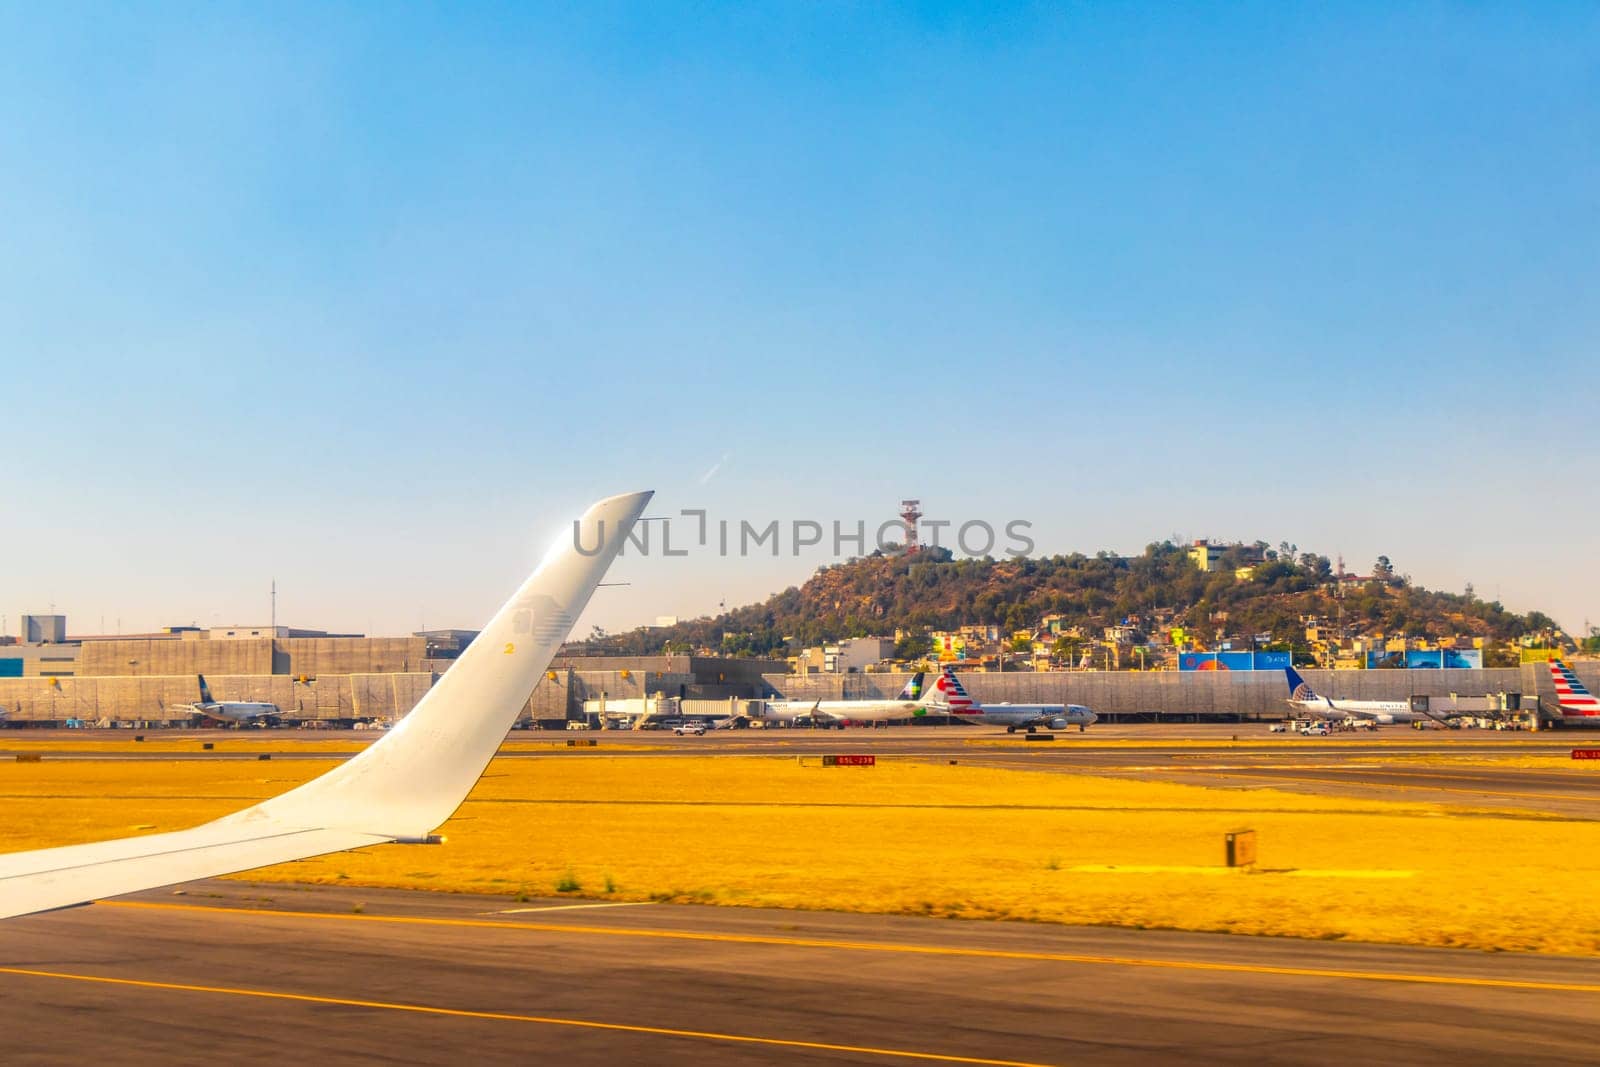 Aircraft at the airport Building and runway Mexico City Mexico. by Arkadij